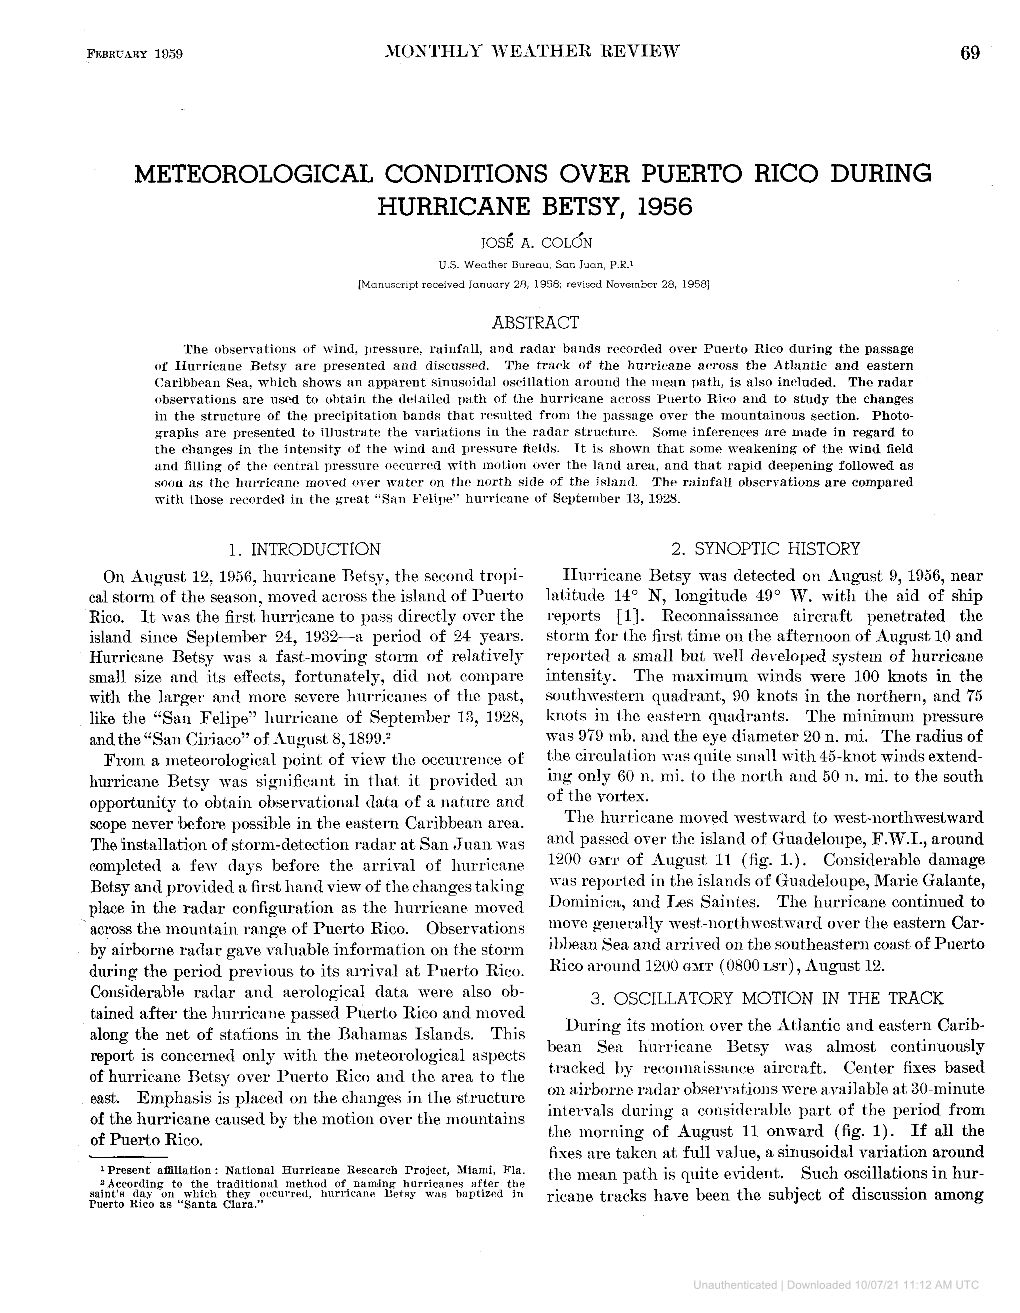 Meteorological Conditions Over Puerto Rico During Hurricane Betsy, 1956 Jos~A